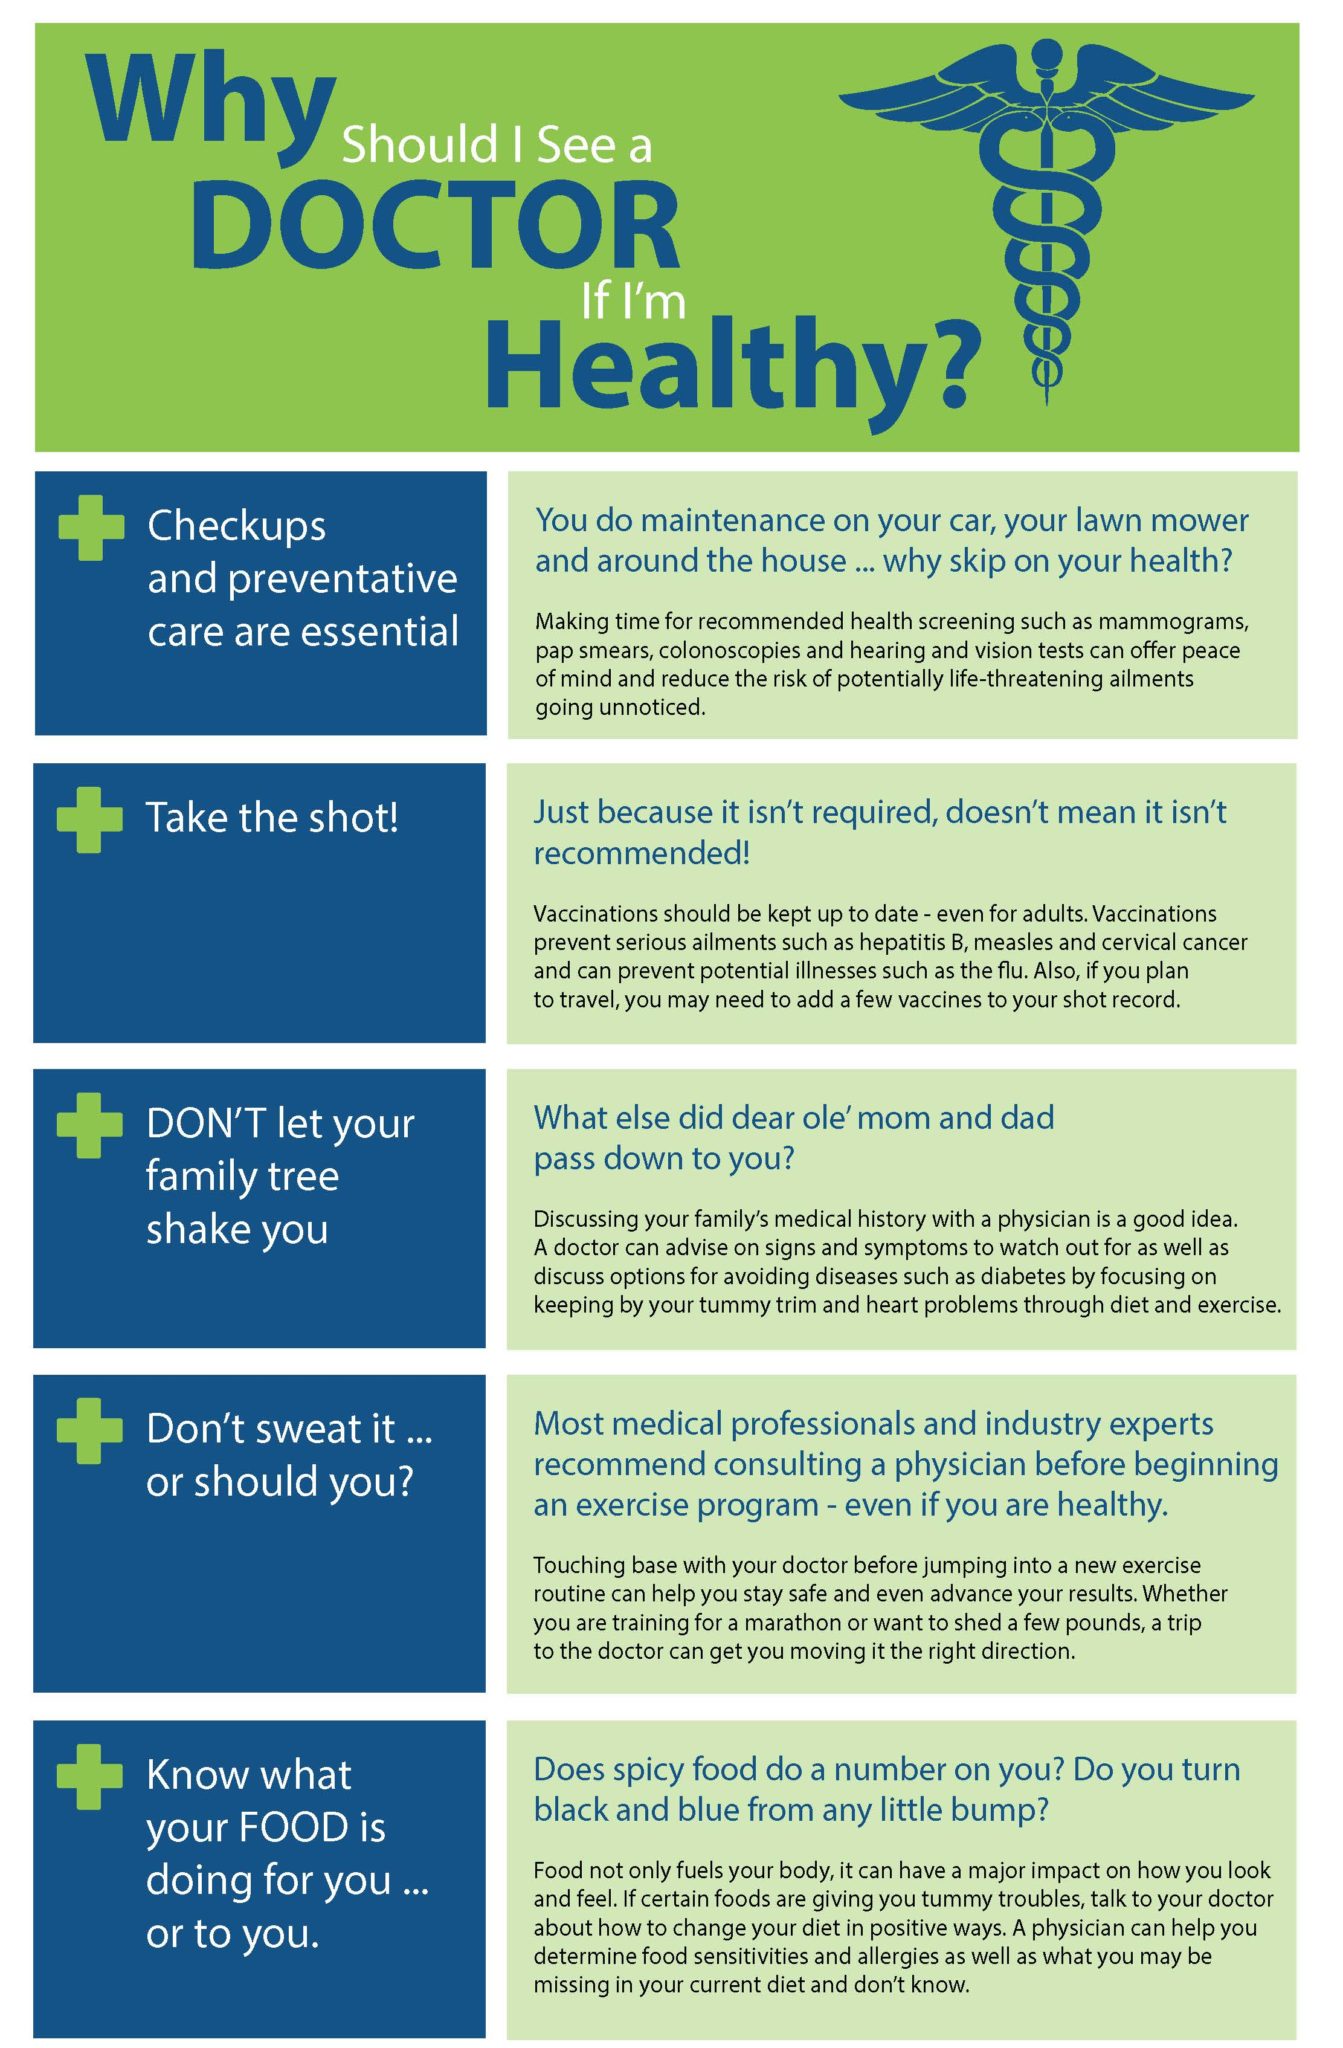 Why do I need to see a doctor if I'm healthy? SLMA